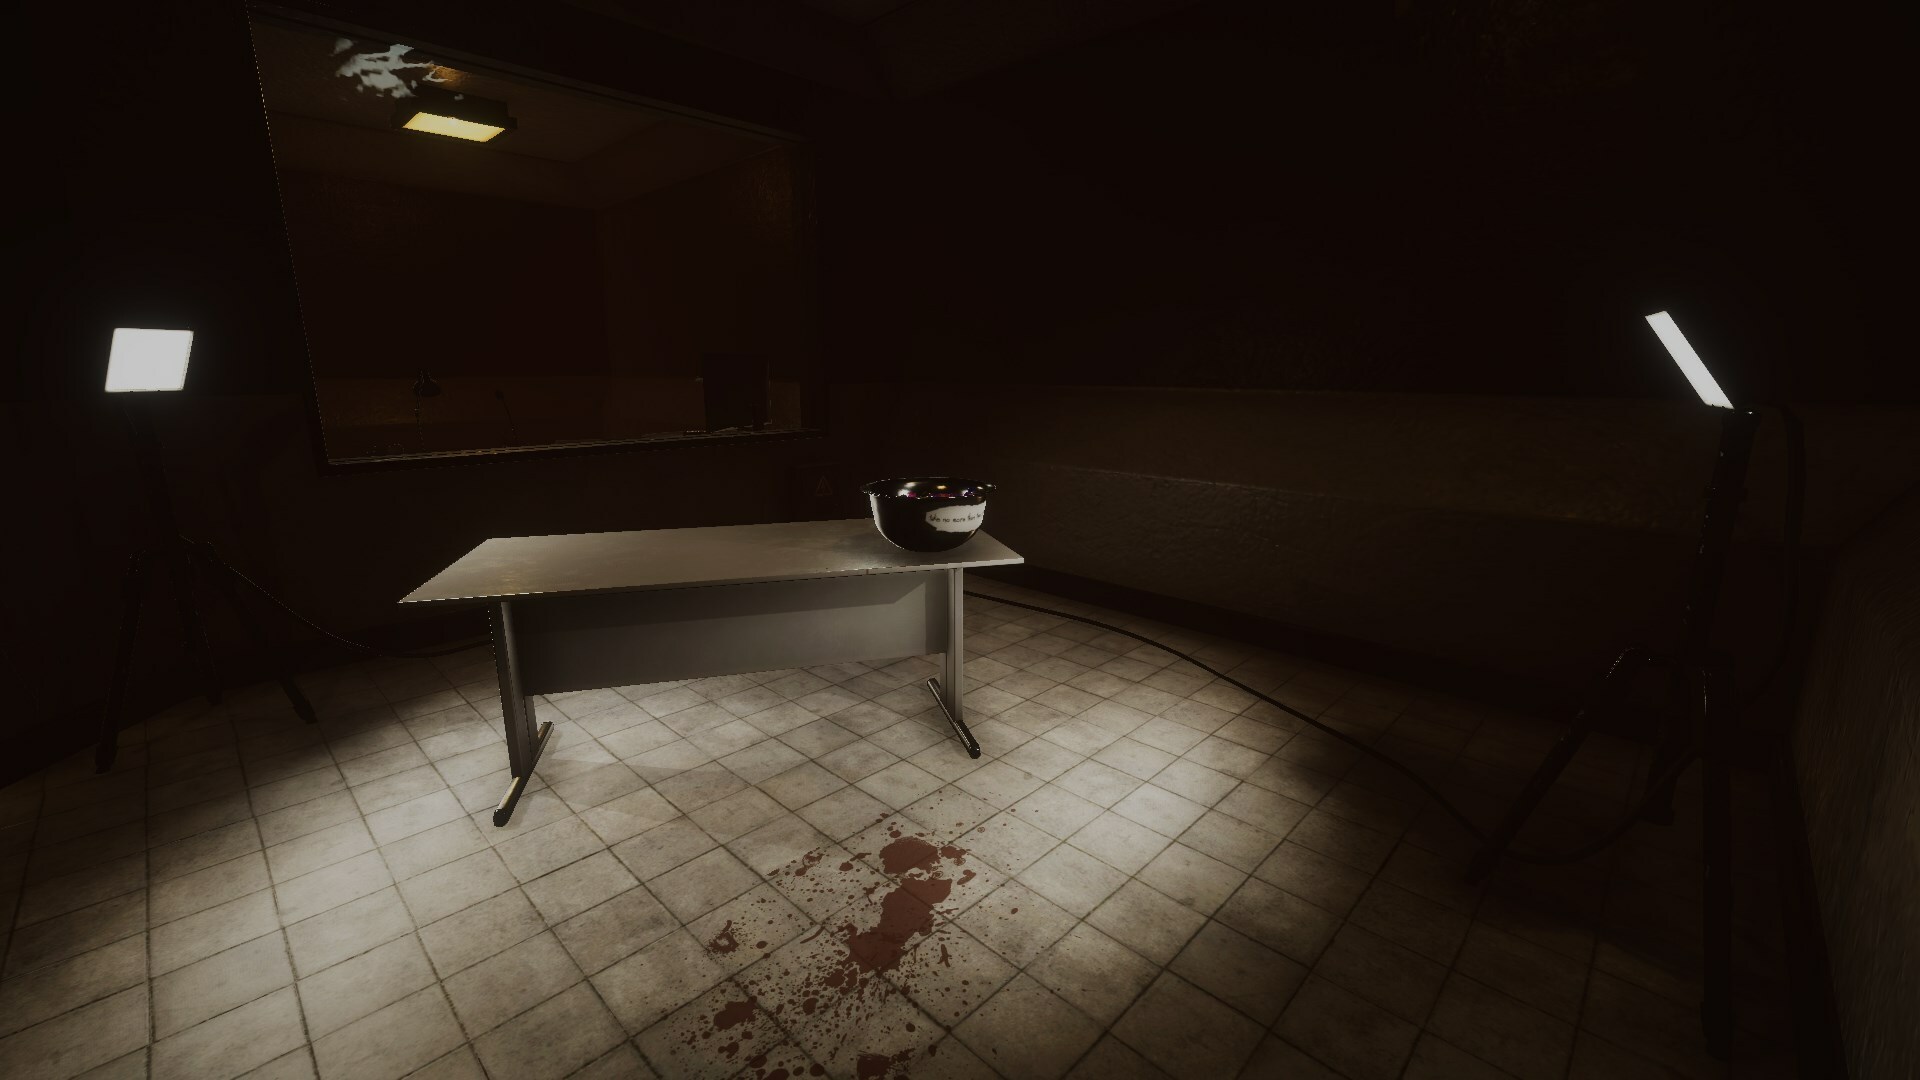 v1.1.0 - RELEASE OF THE GAME. · SCP: Containment Breach Multiplayer update  for 25 October 2021 · SteamDB